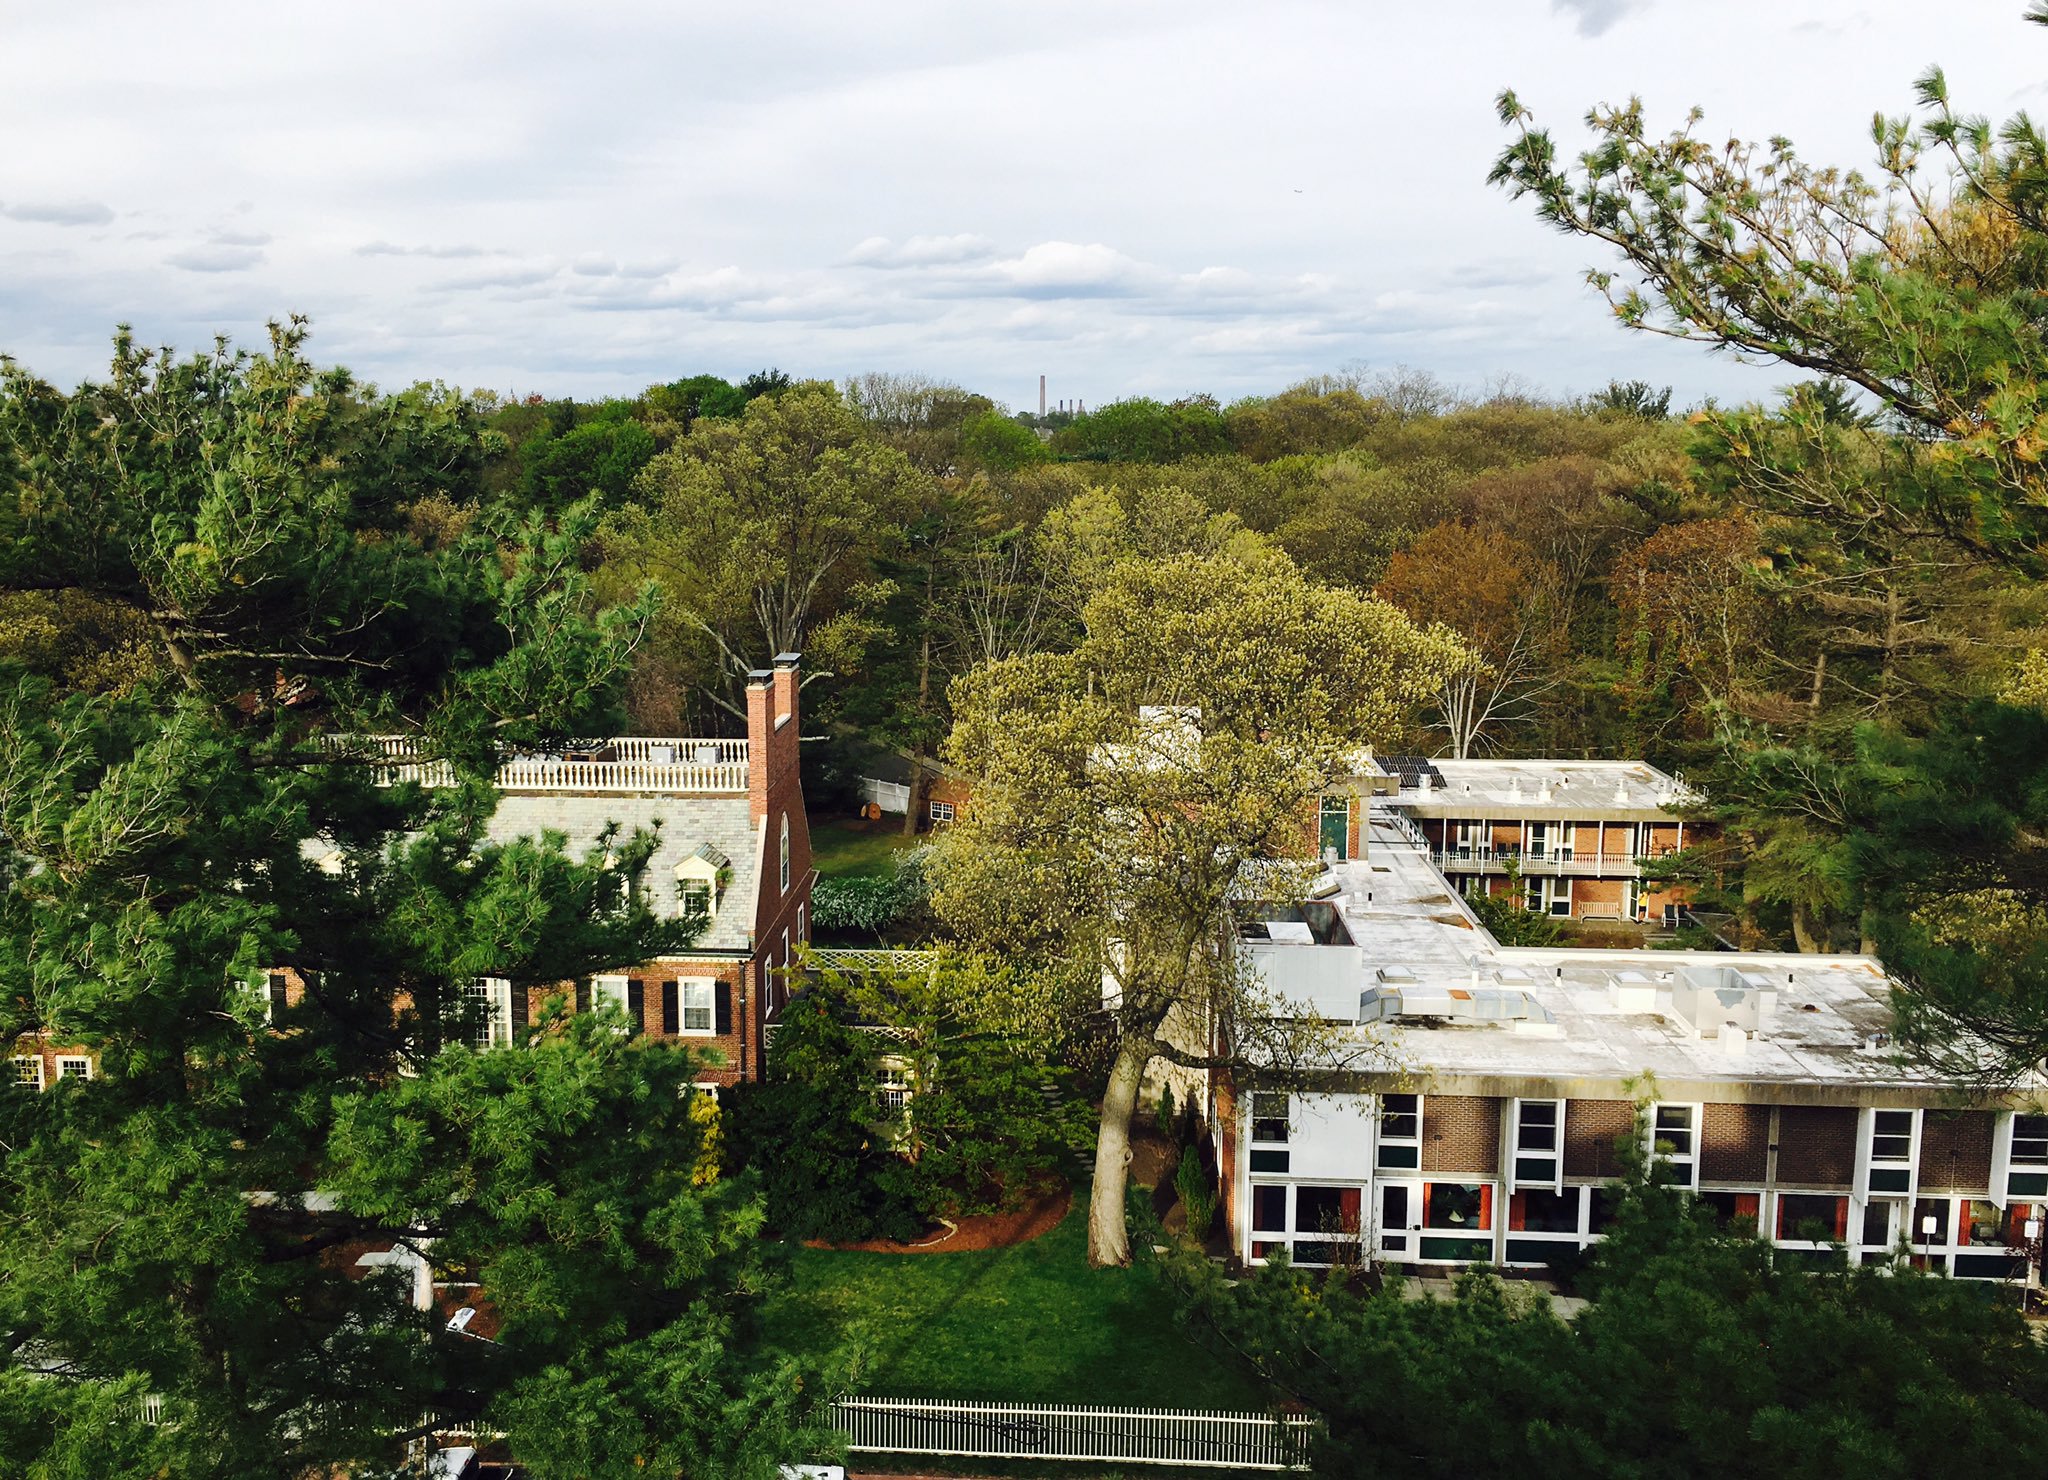 CSWR & Jewett House from Andover rooftop. Thanks for the tour Ralph! #HDS200 
Photo courtesy of Bjorn Sorenson MTS '02 https://t.co/WZLOzzeBy2